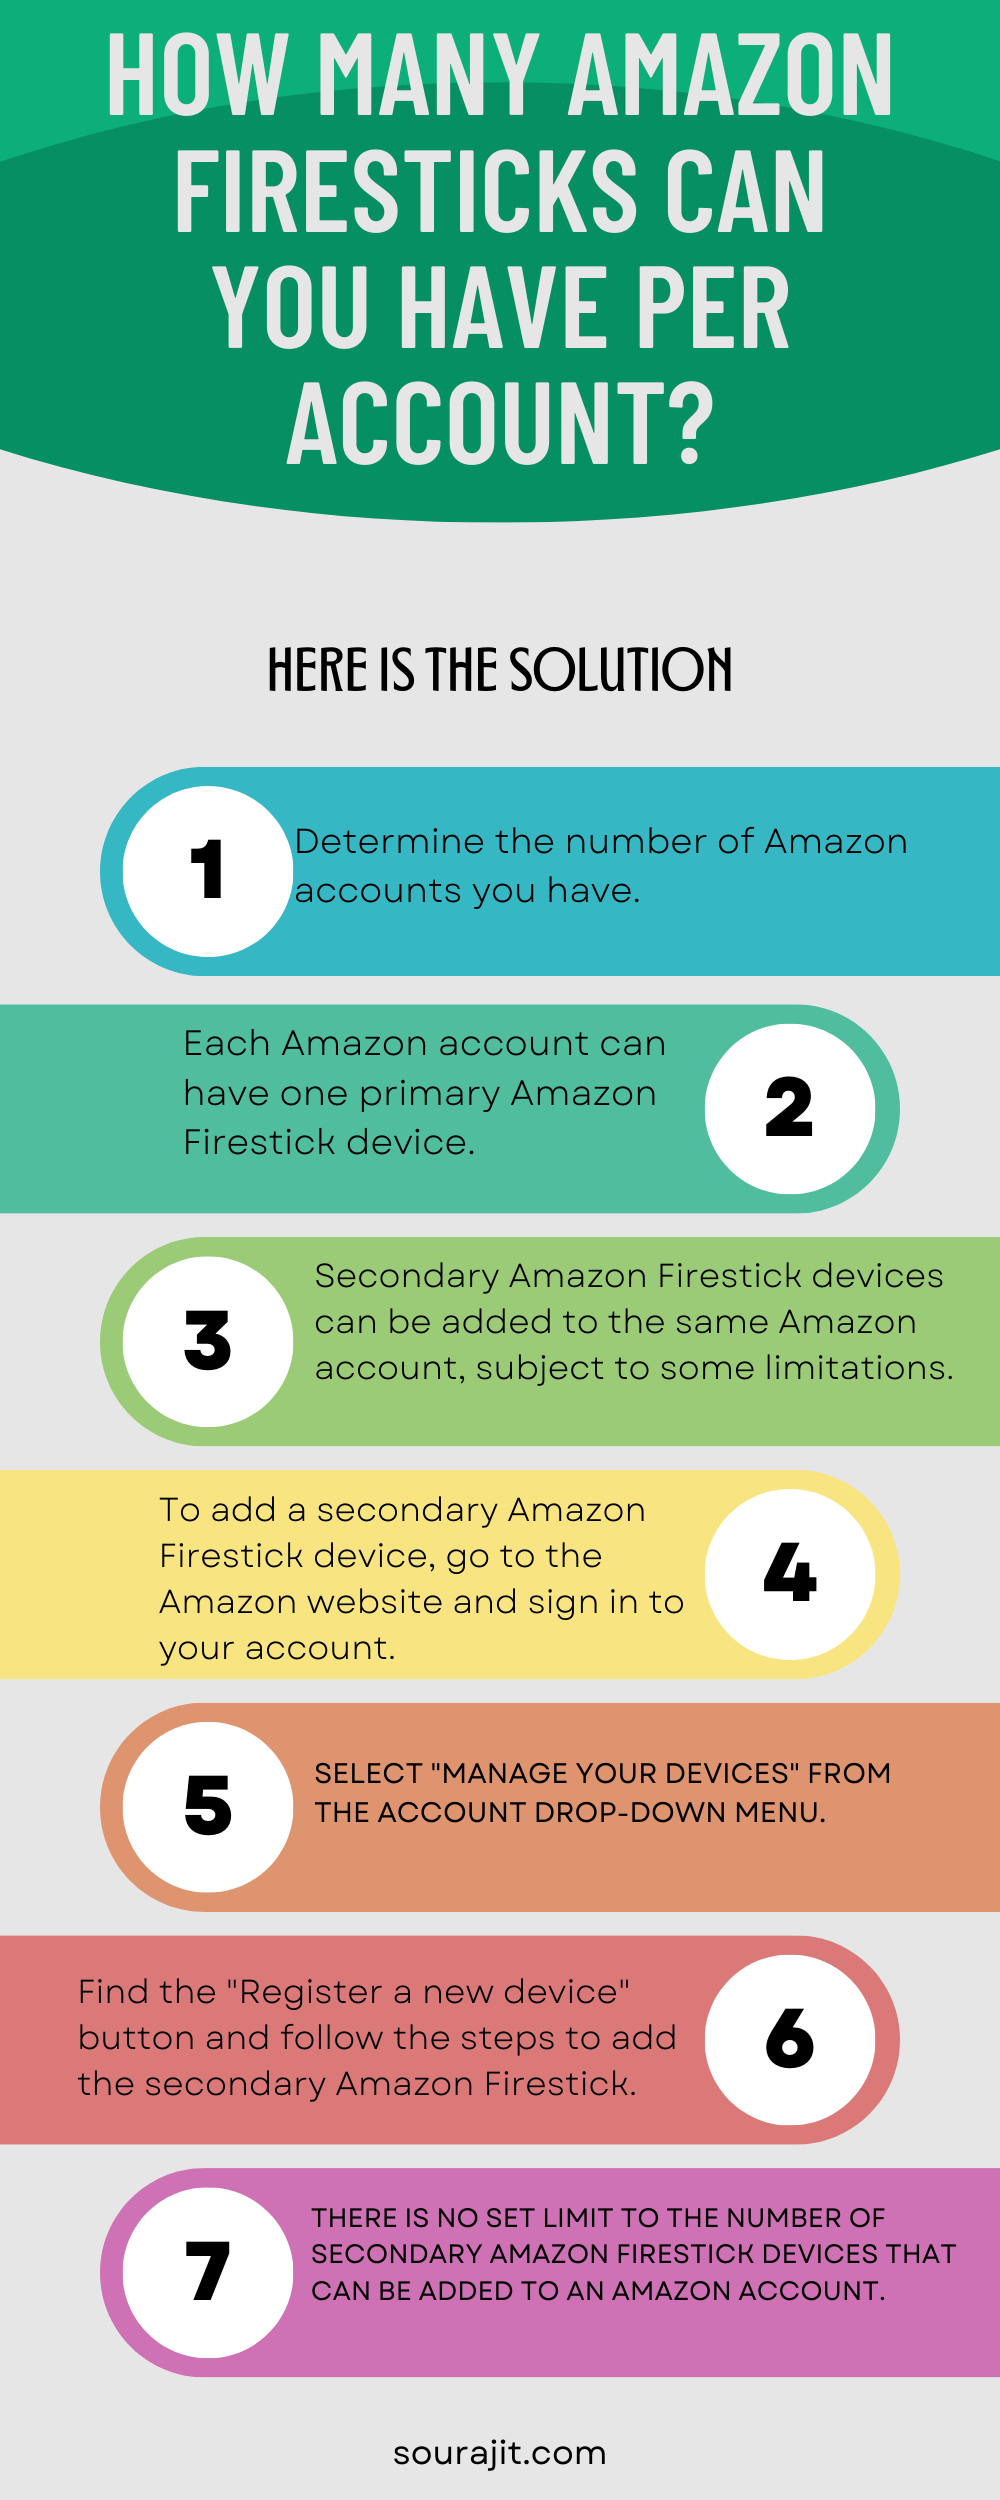 How Many Amazon Firesticks Can You Have Per Account?